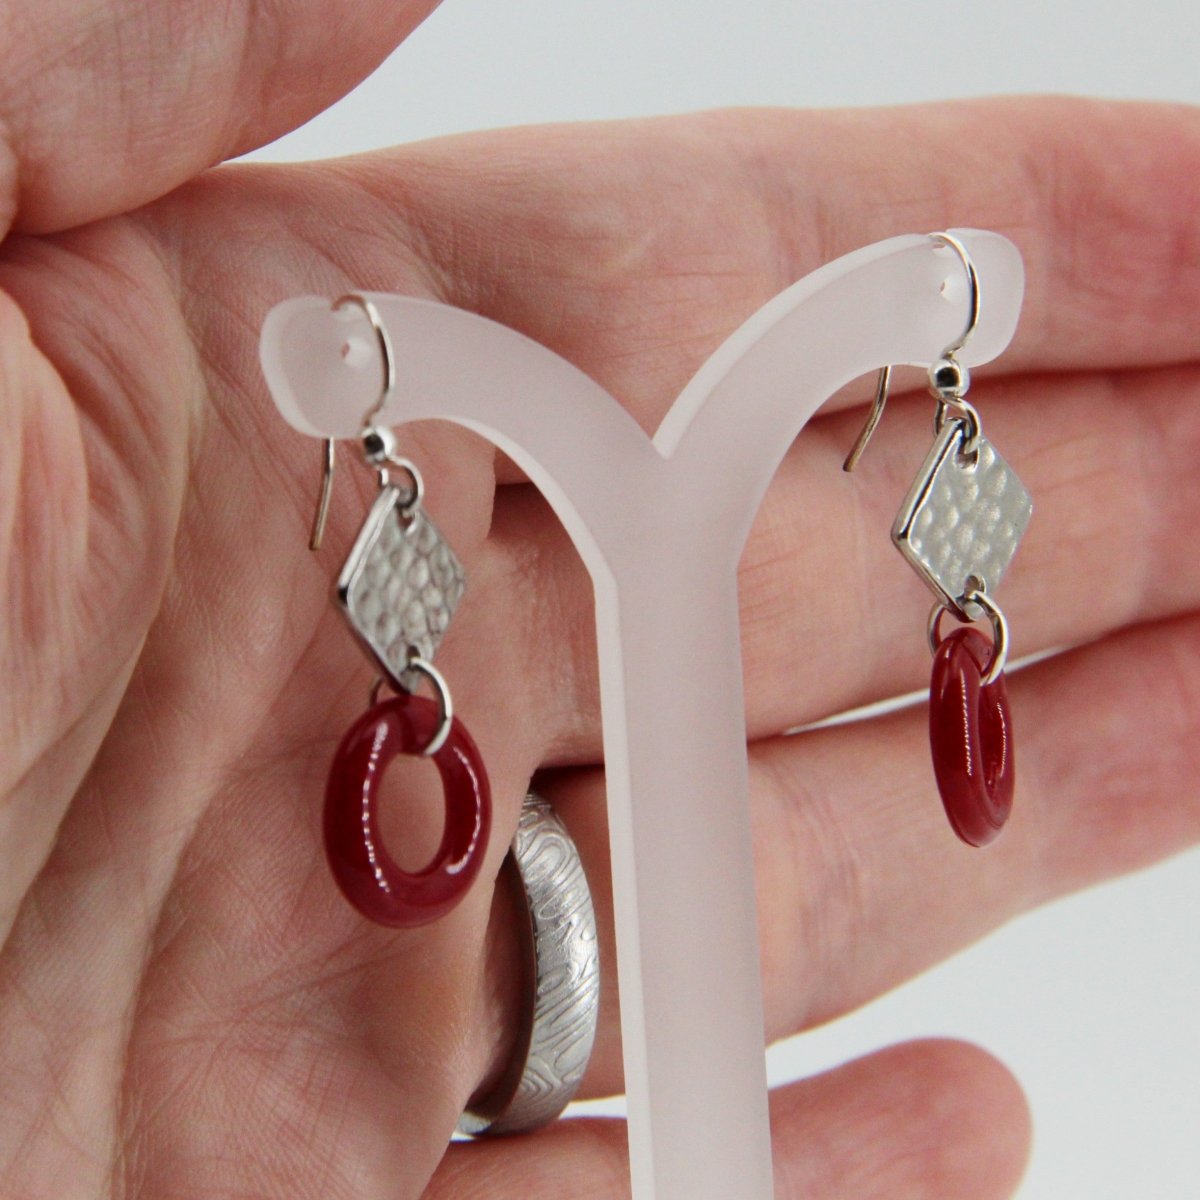 Red Glass Earrings with Silver Diamond Shaped Charm